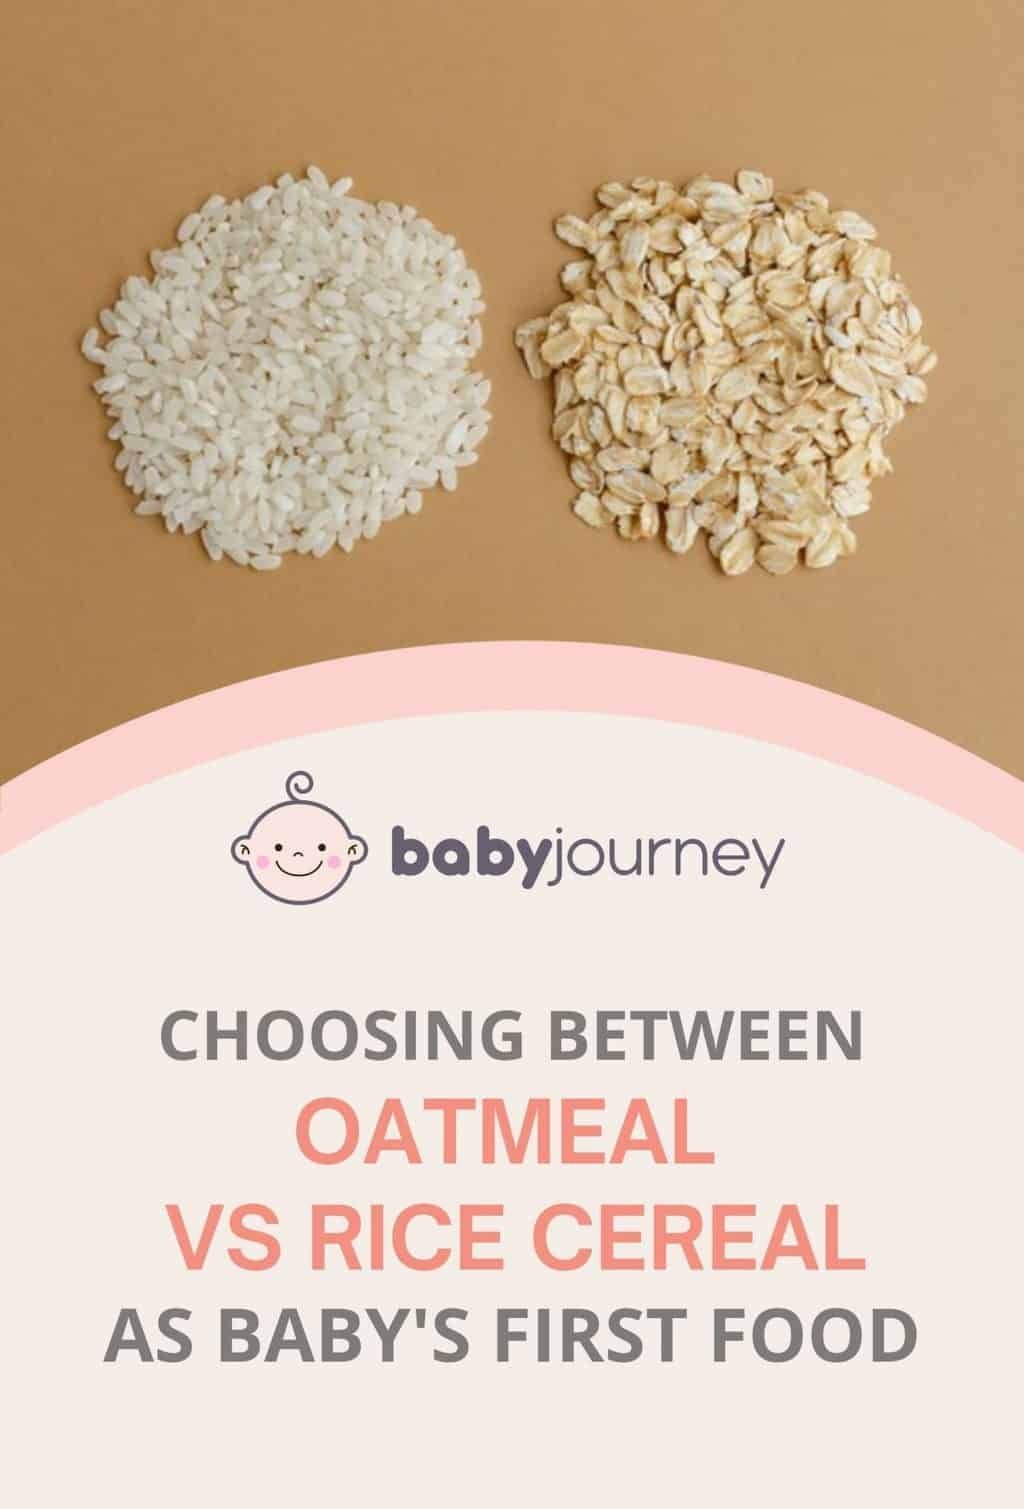 Choosing Between Oatmeal vs Rice Cereal As Baby’s First Food